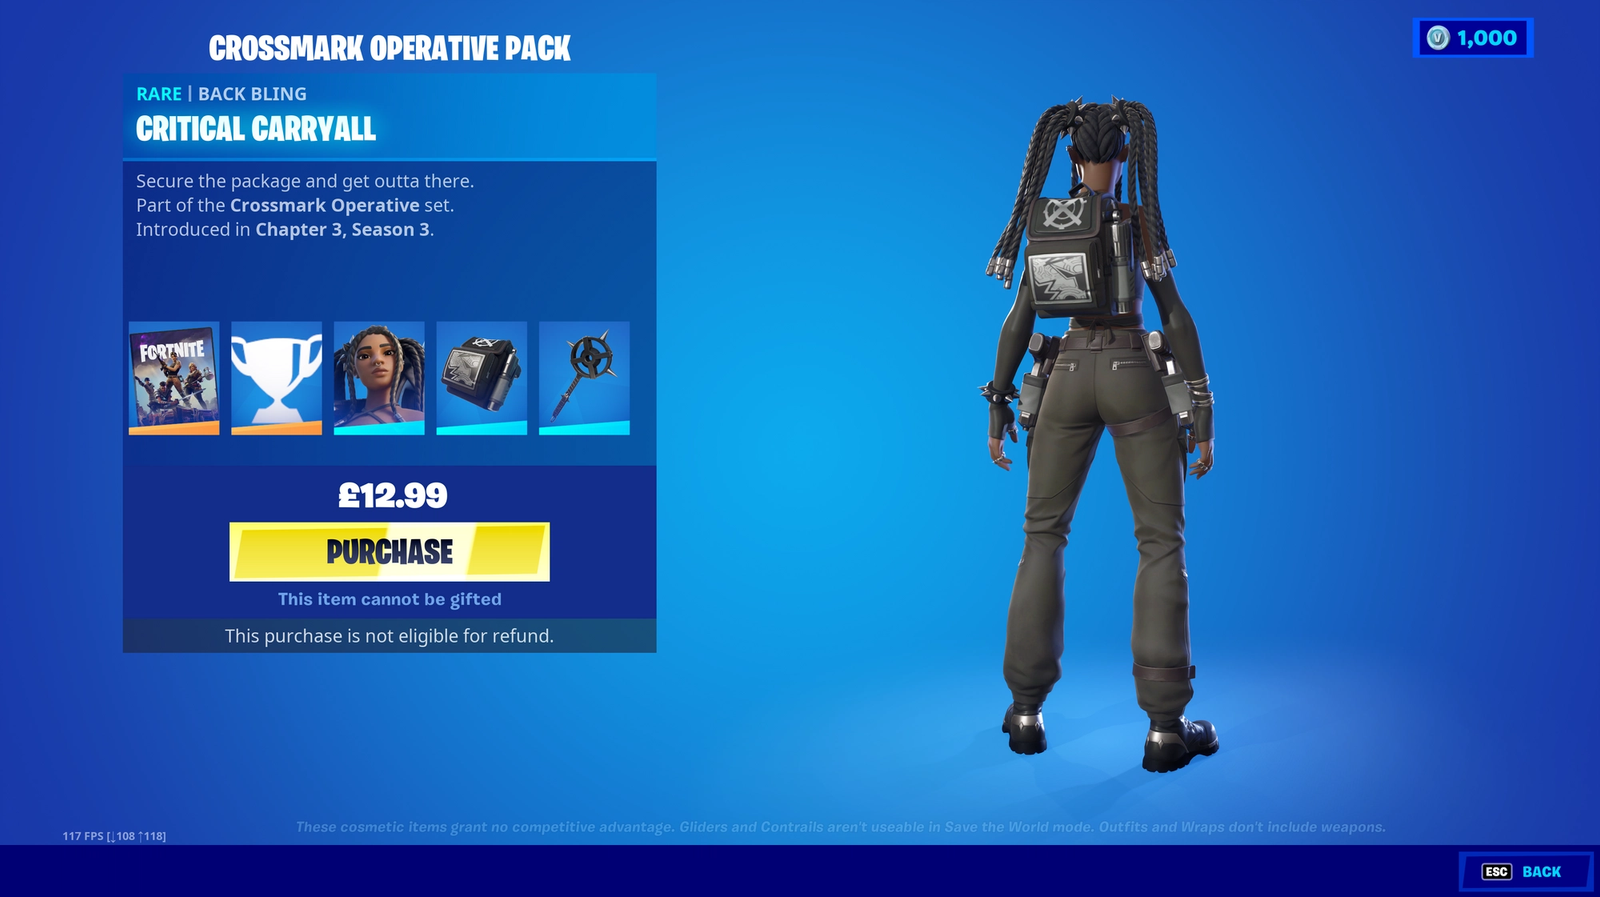 A look at the Critical Carryall Back Bling found in Fortnite's Crossmark Operative Pack